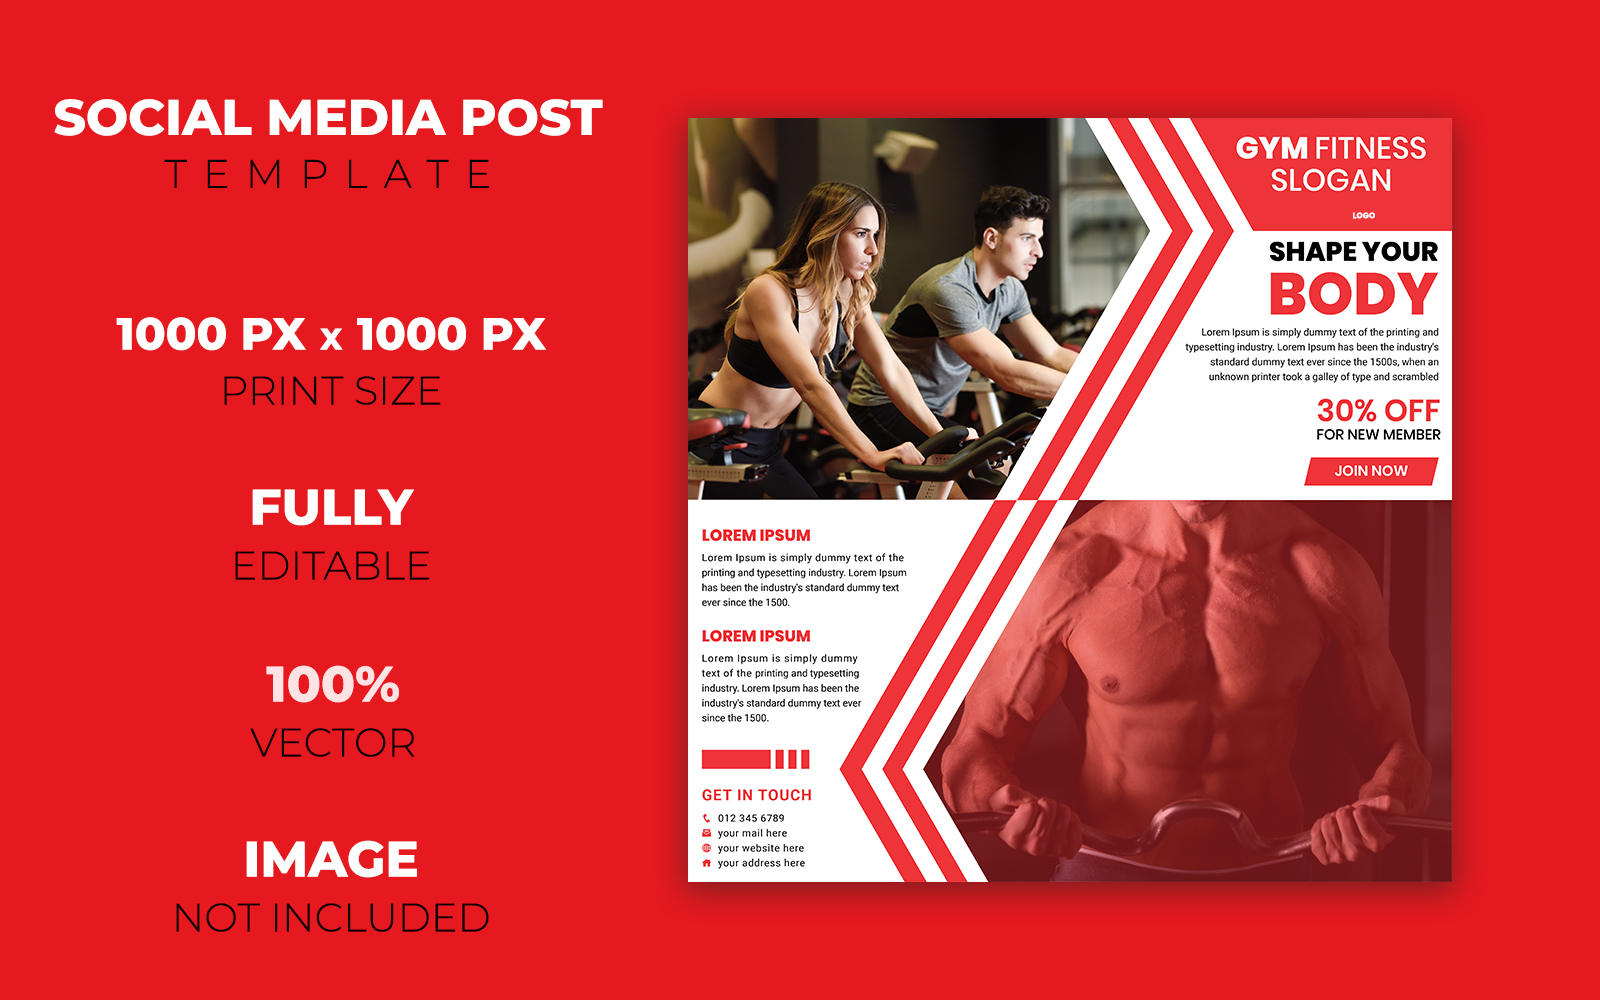 Gym Fitness Social Media Post Design - Corporate Identity Template